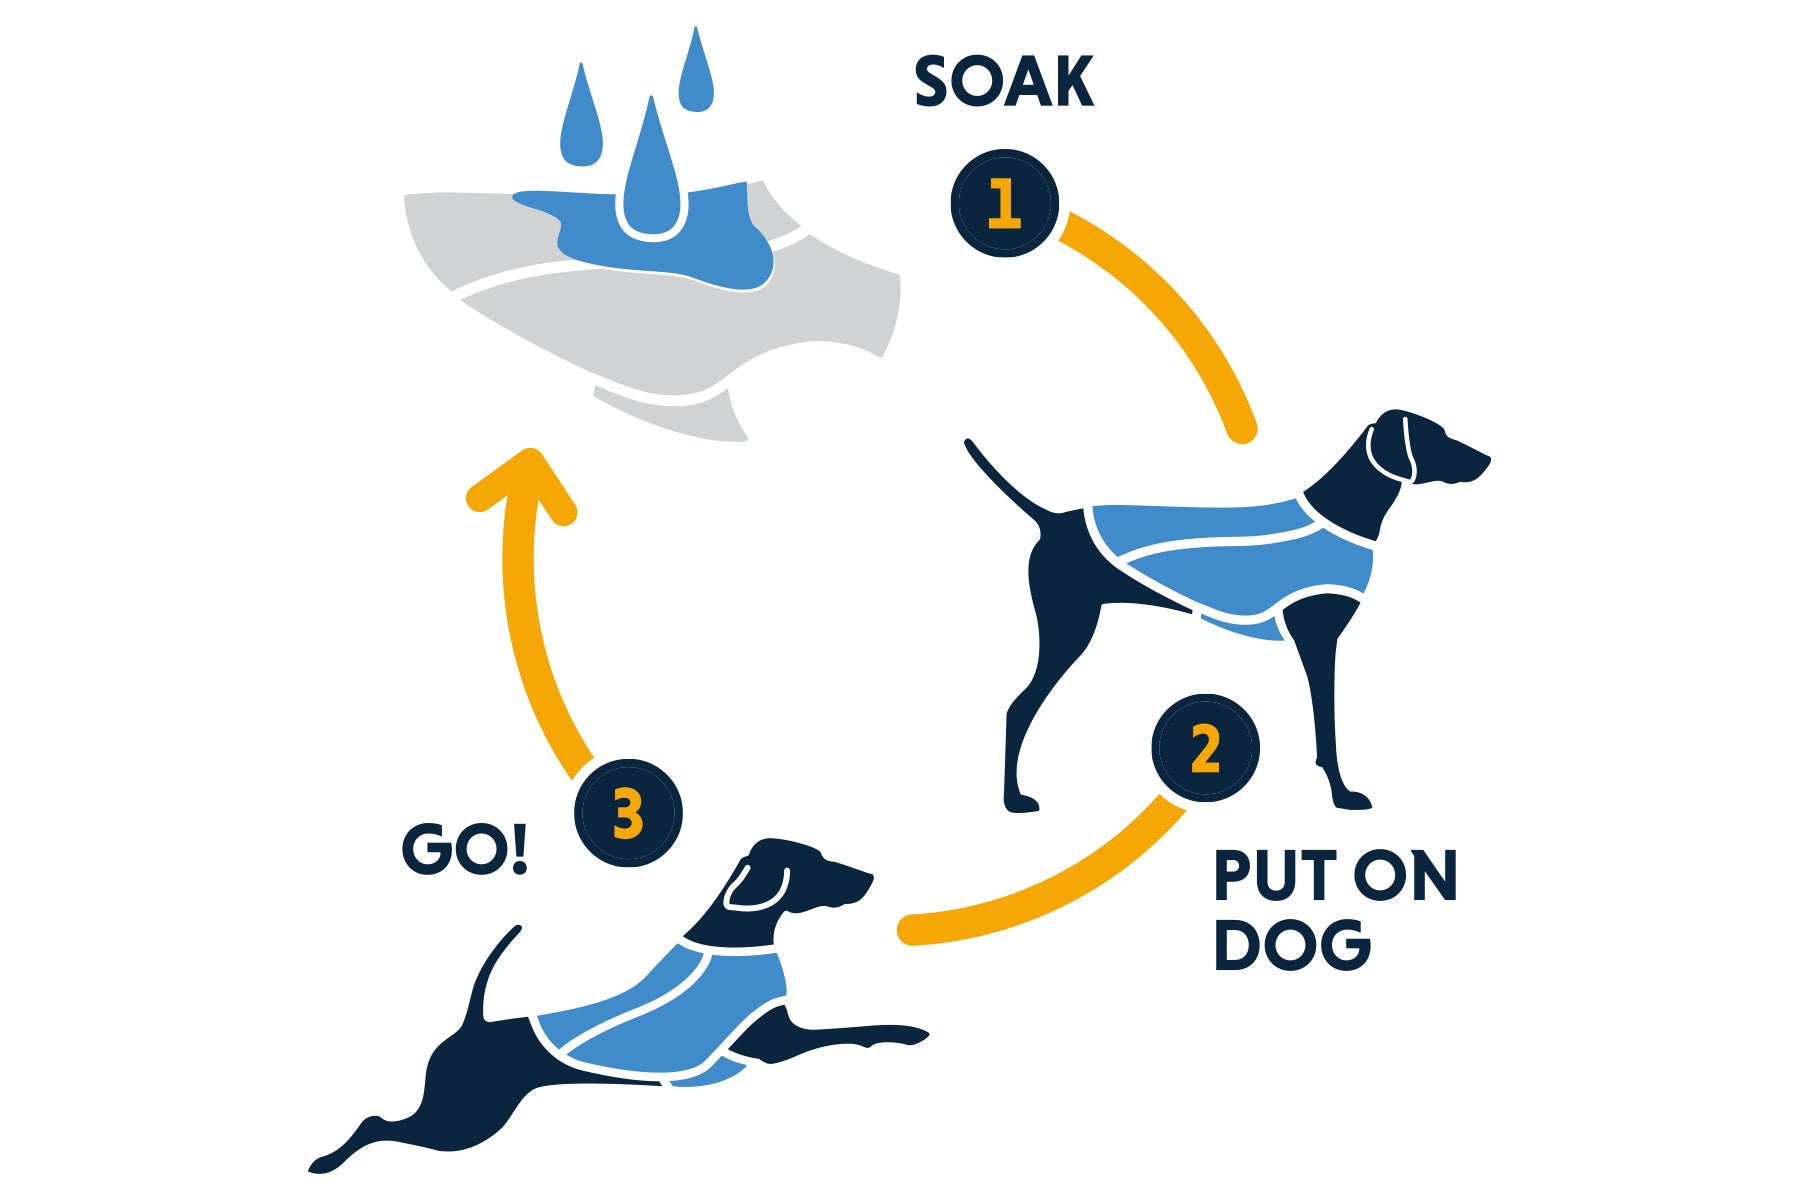 how to use cooling dog gear: wet, wear, go!